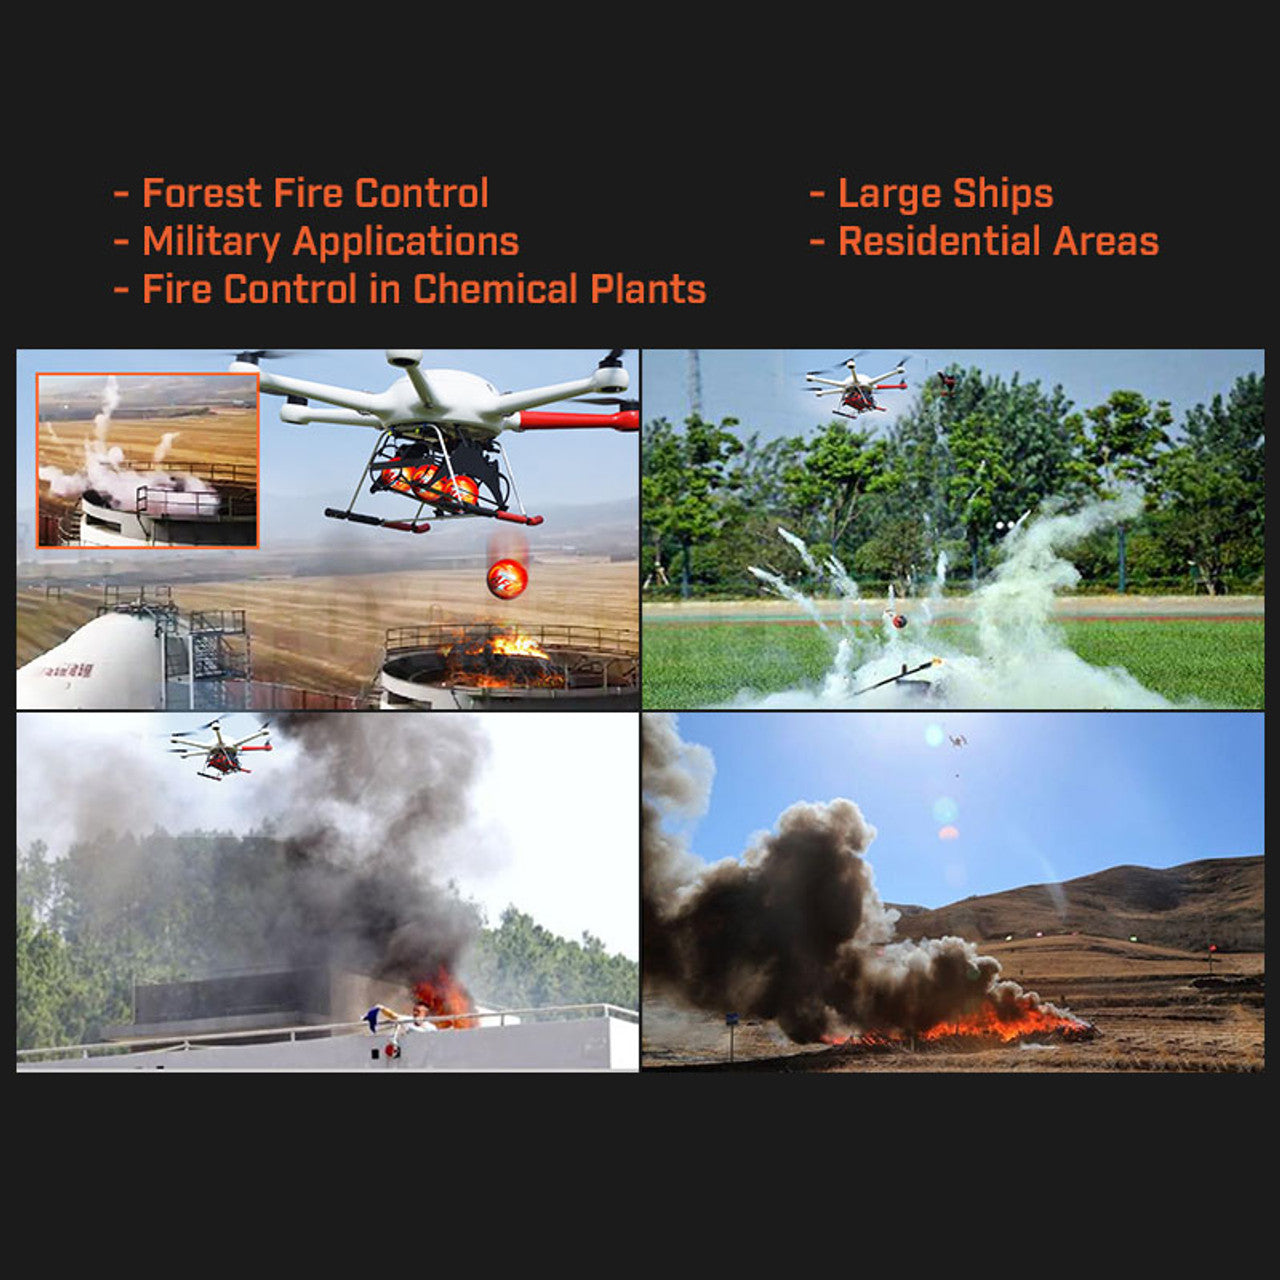 Fire suppression foam suitable for various settings: forests, ships, military, homes, and chemical plants.